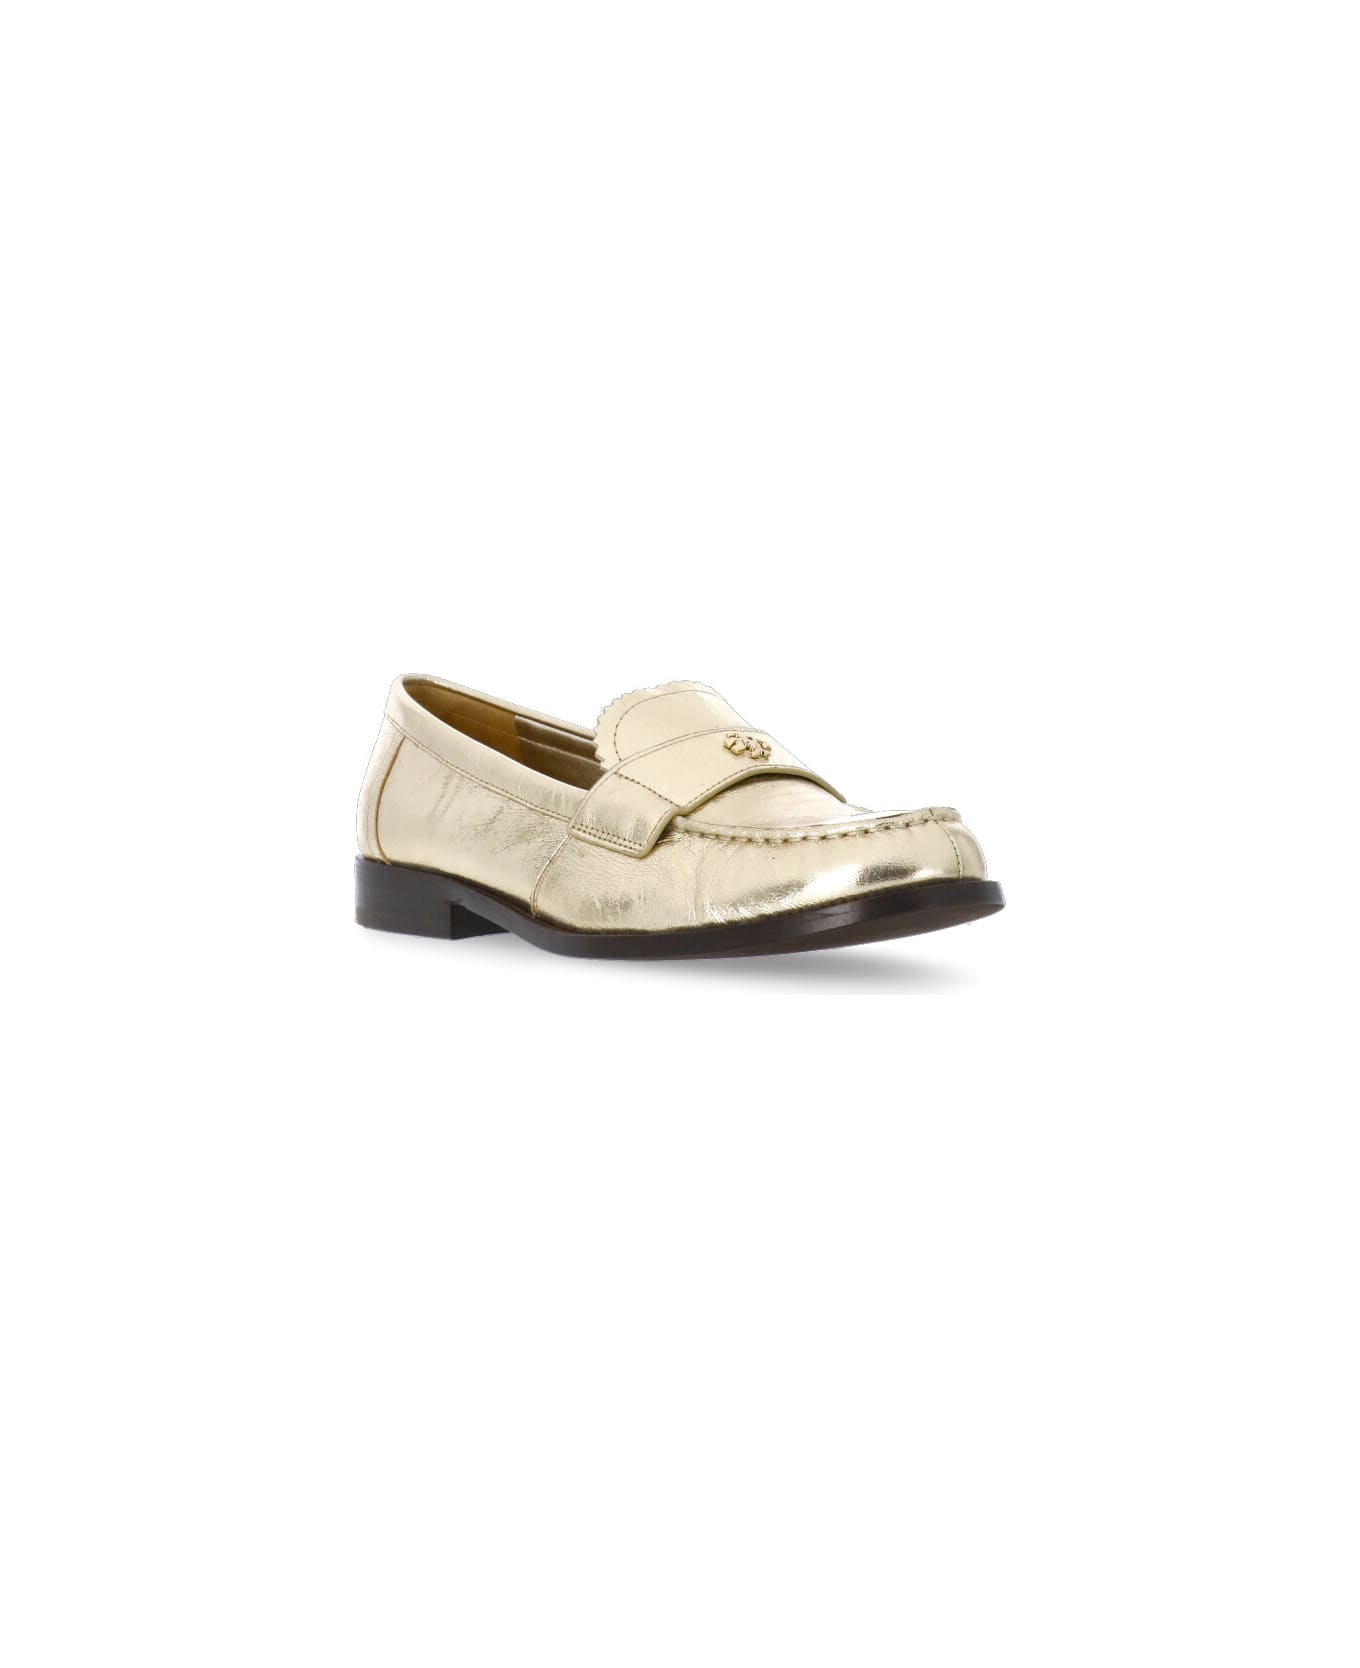 Tory Burch Leather Loafer - Golden フラットシューズ